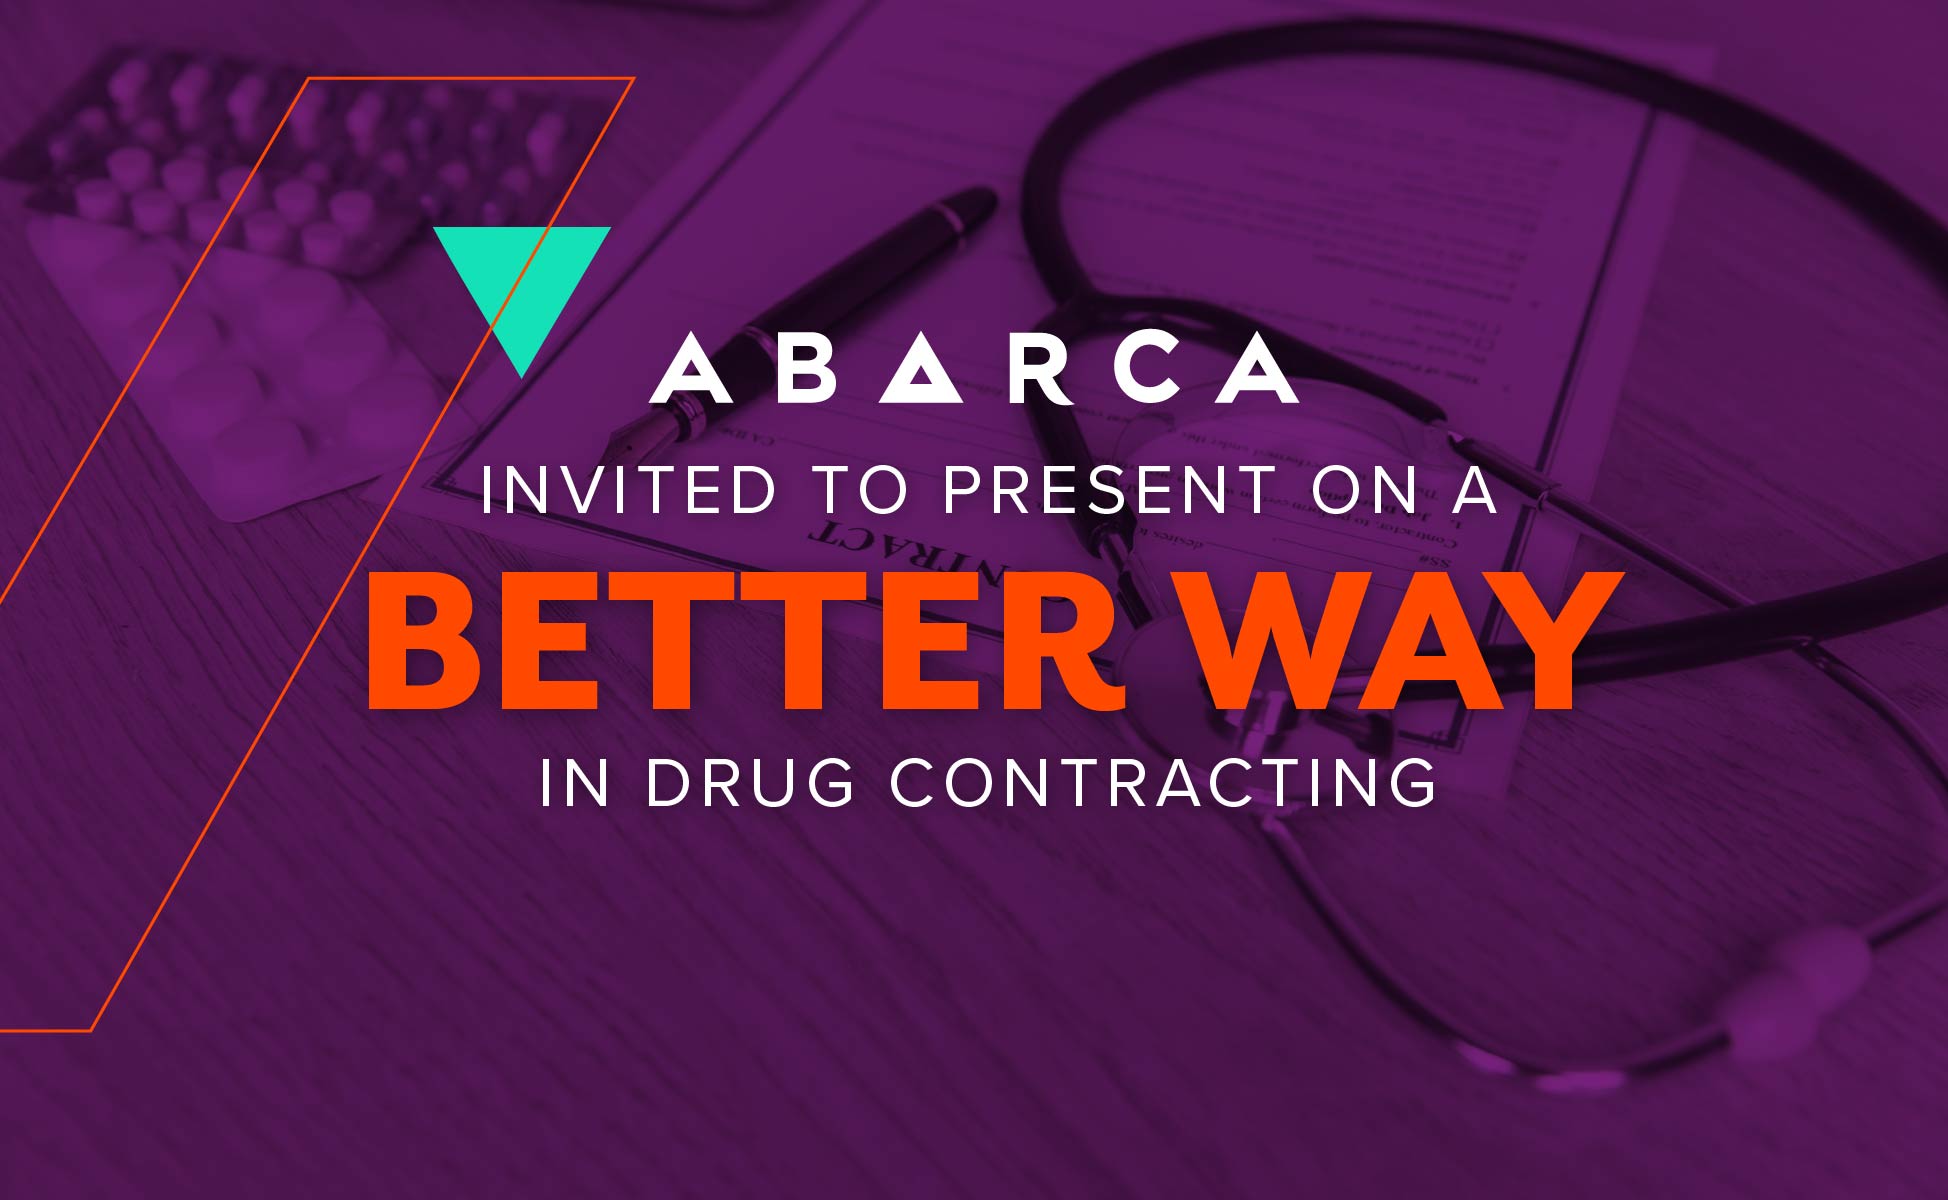 Abarca Invited to Present on a Better Way in Drug Contracting